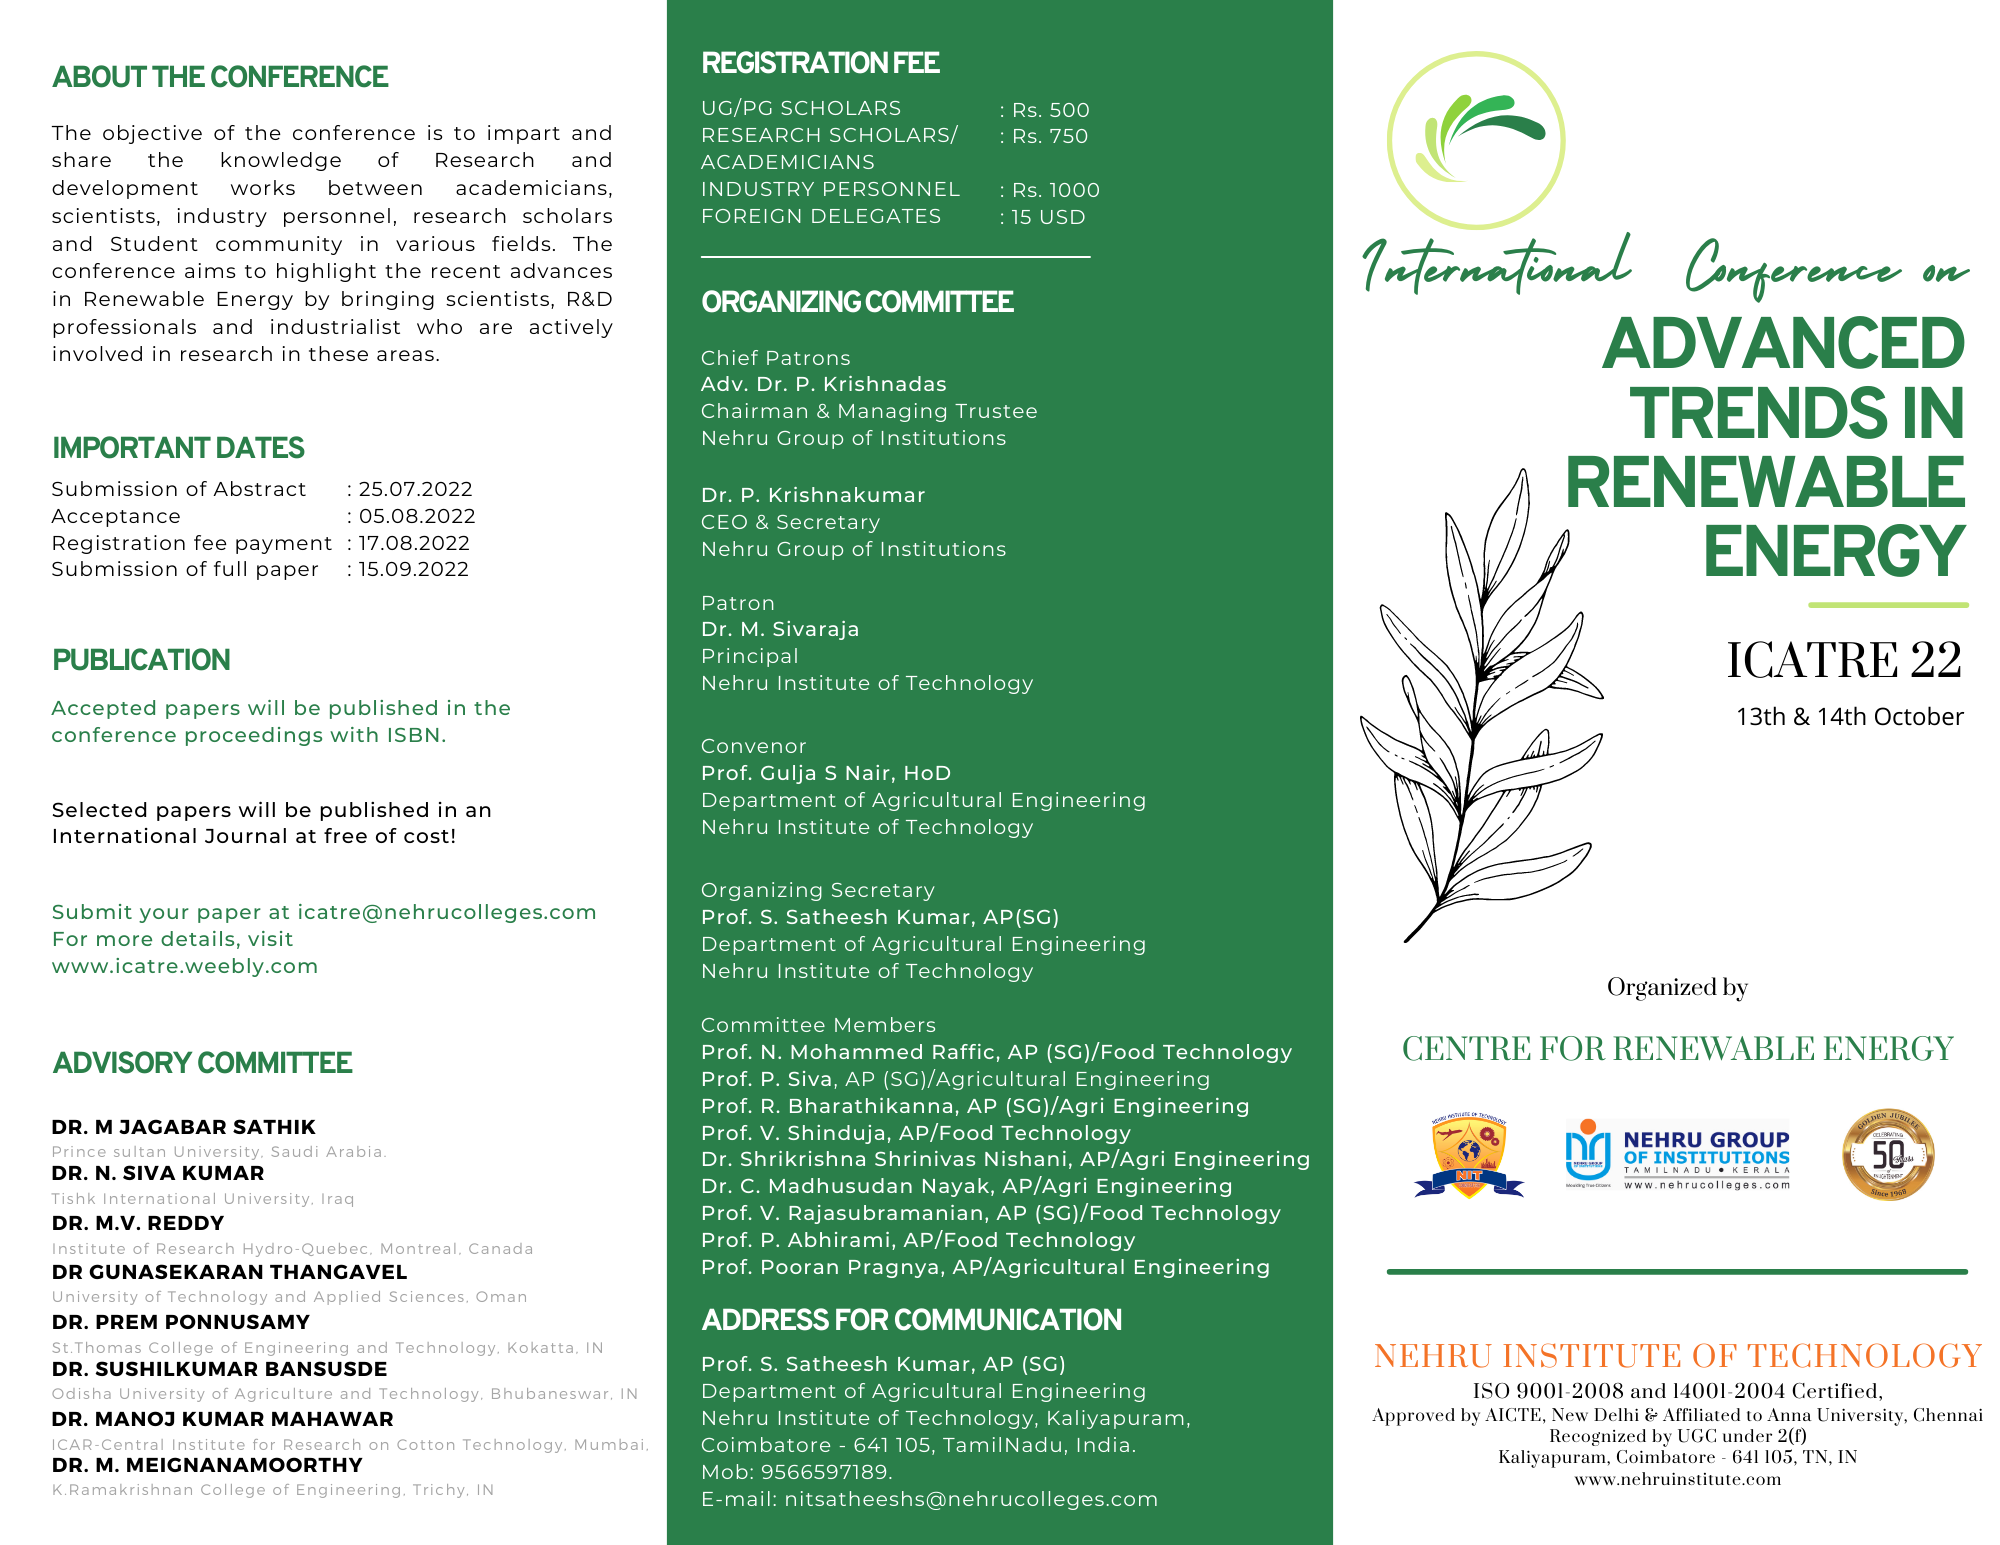 International Conference on Advanced Trends in Renewable Energy - Nehru Institute of Technology,